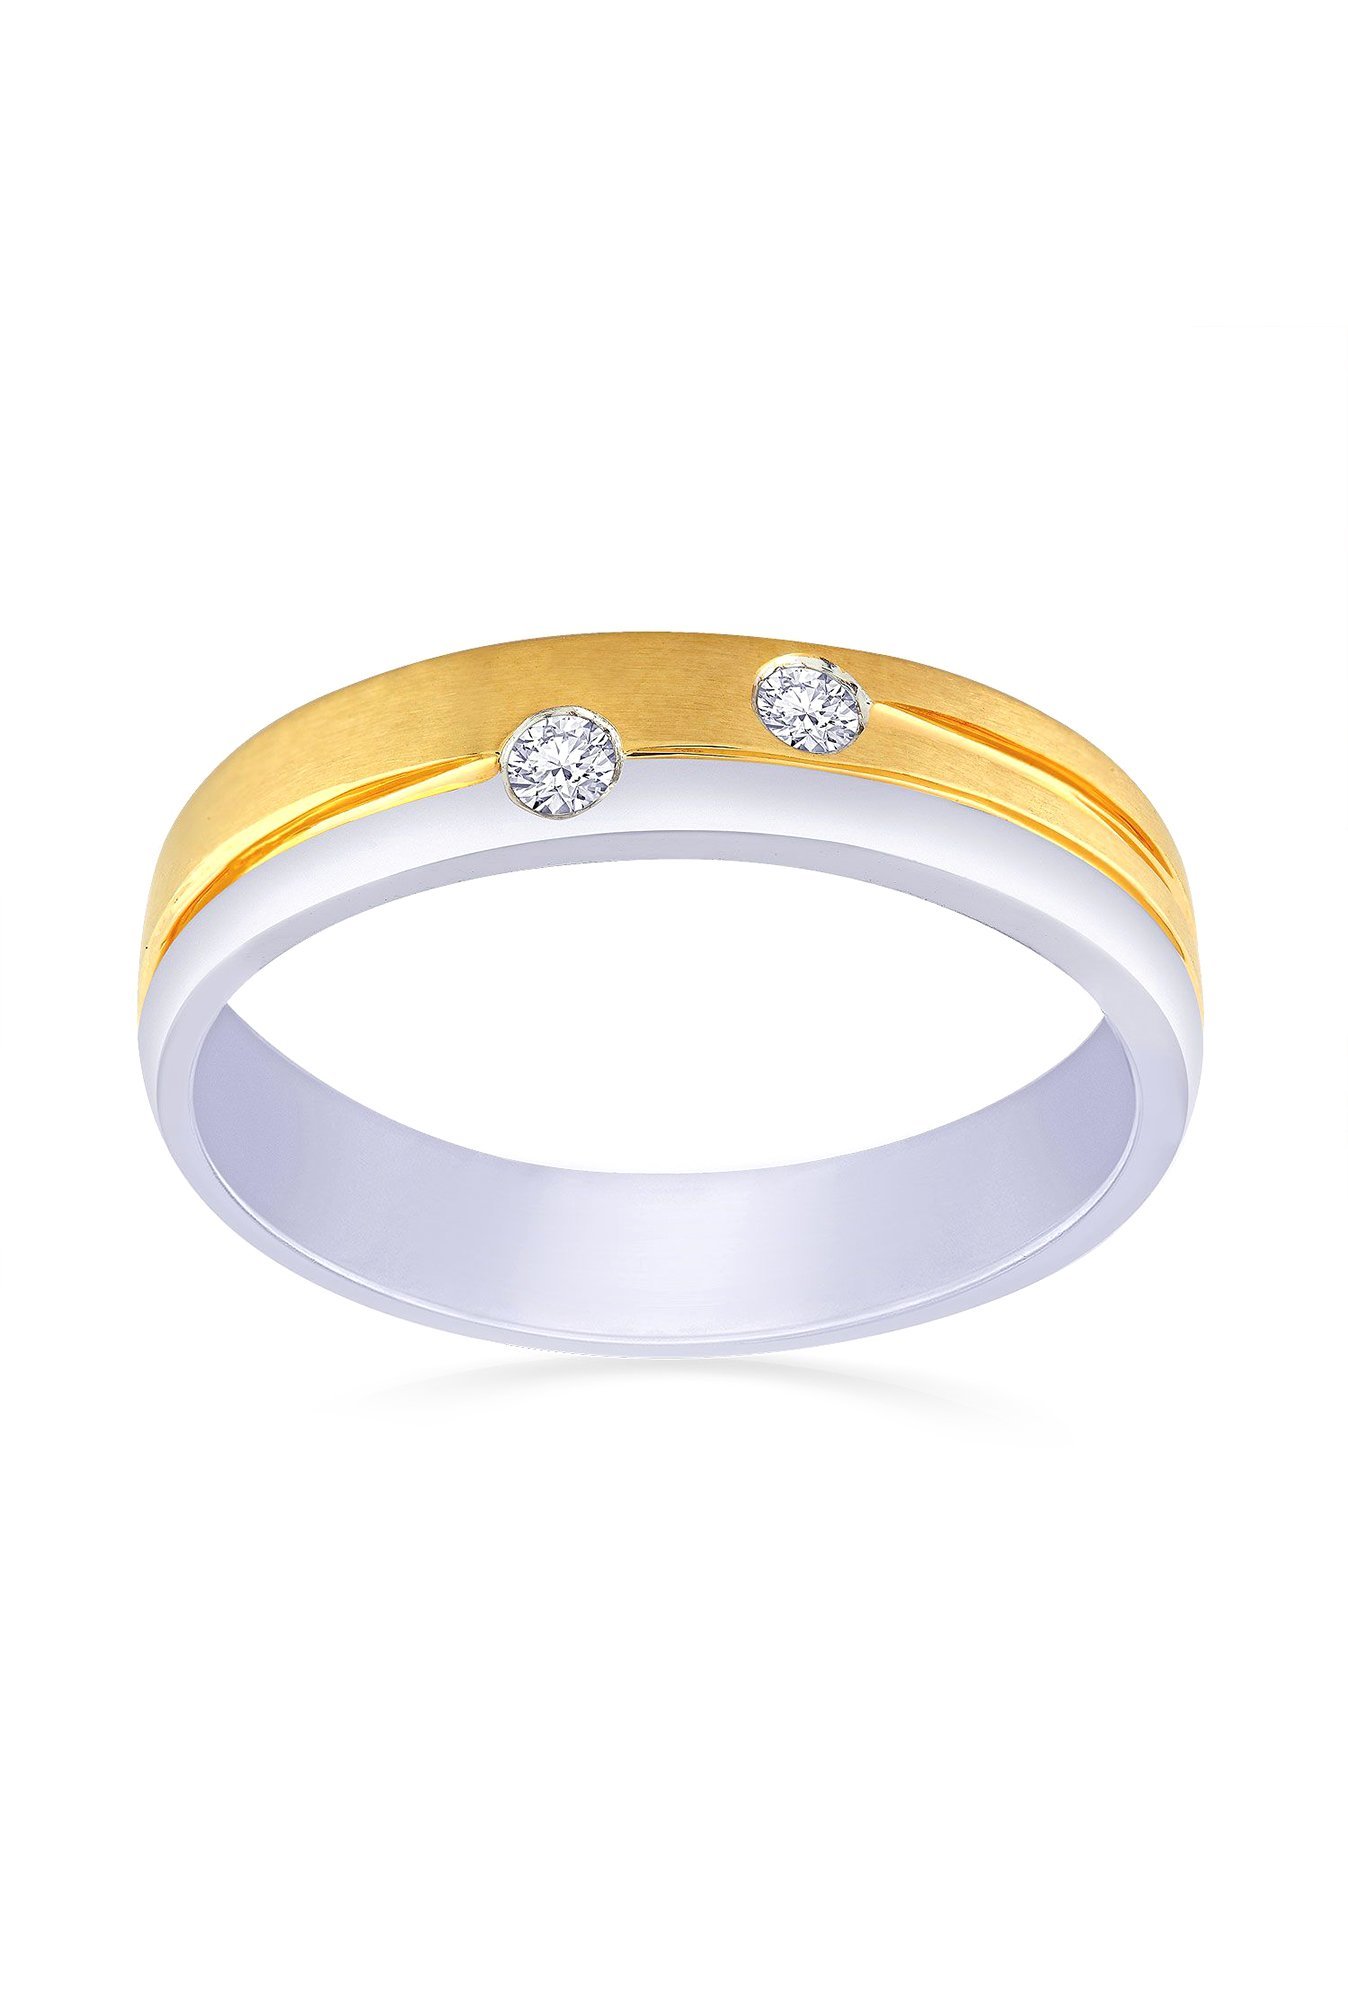 Buy MALABAR GOLD AND DIAMONDS Womens Mine Diamond Ring- Size 7 | Shoppers  Stop